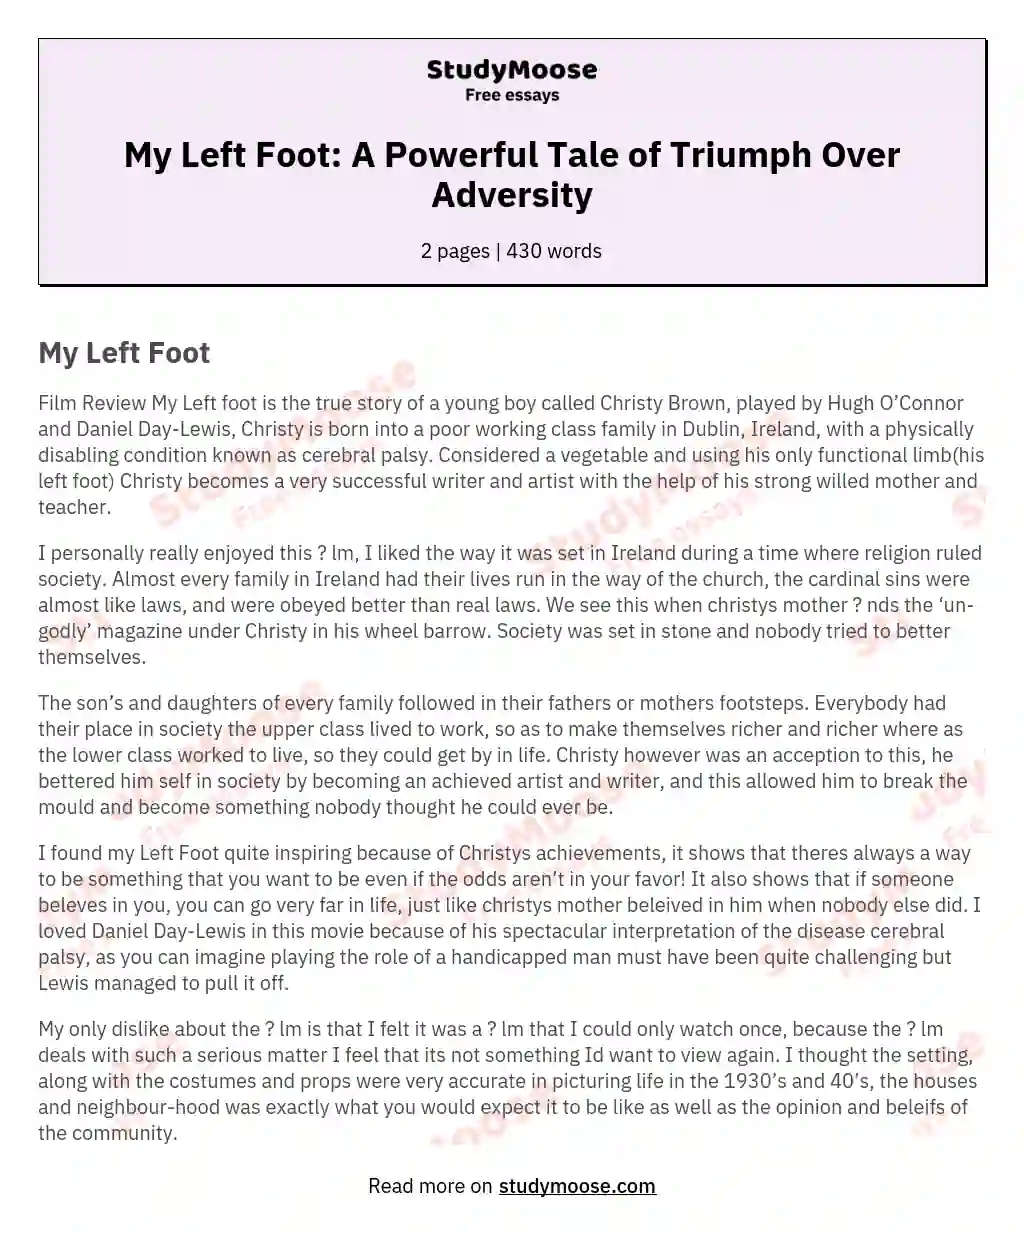 My Left Foot: A Powerful Tale of Triumph Over Adversity essay